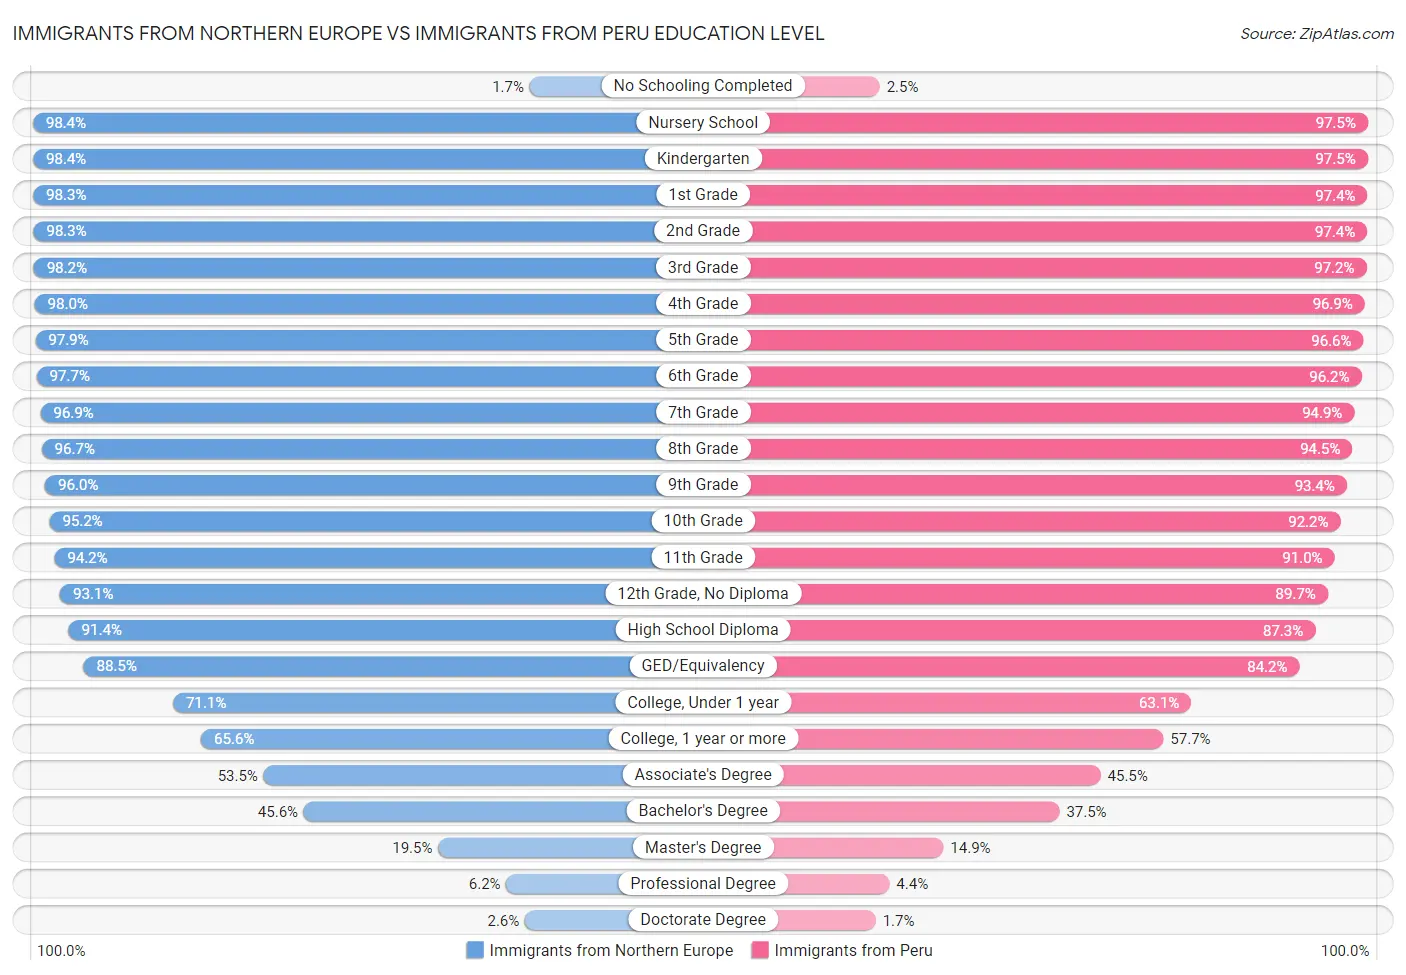 Immigrants from Northern Europe vs Immigrants from Peru Education Level